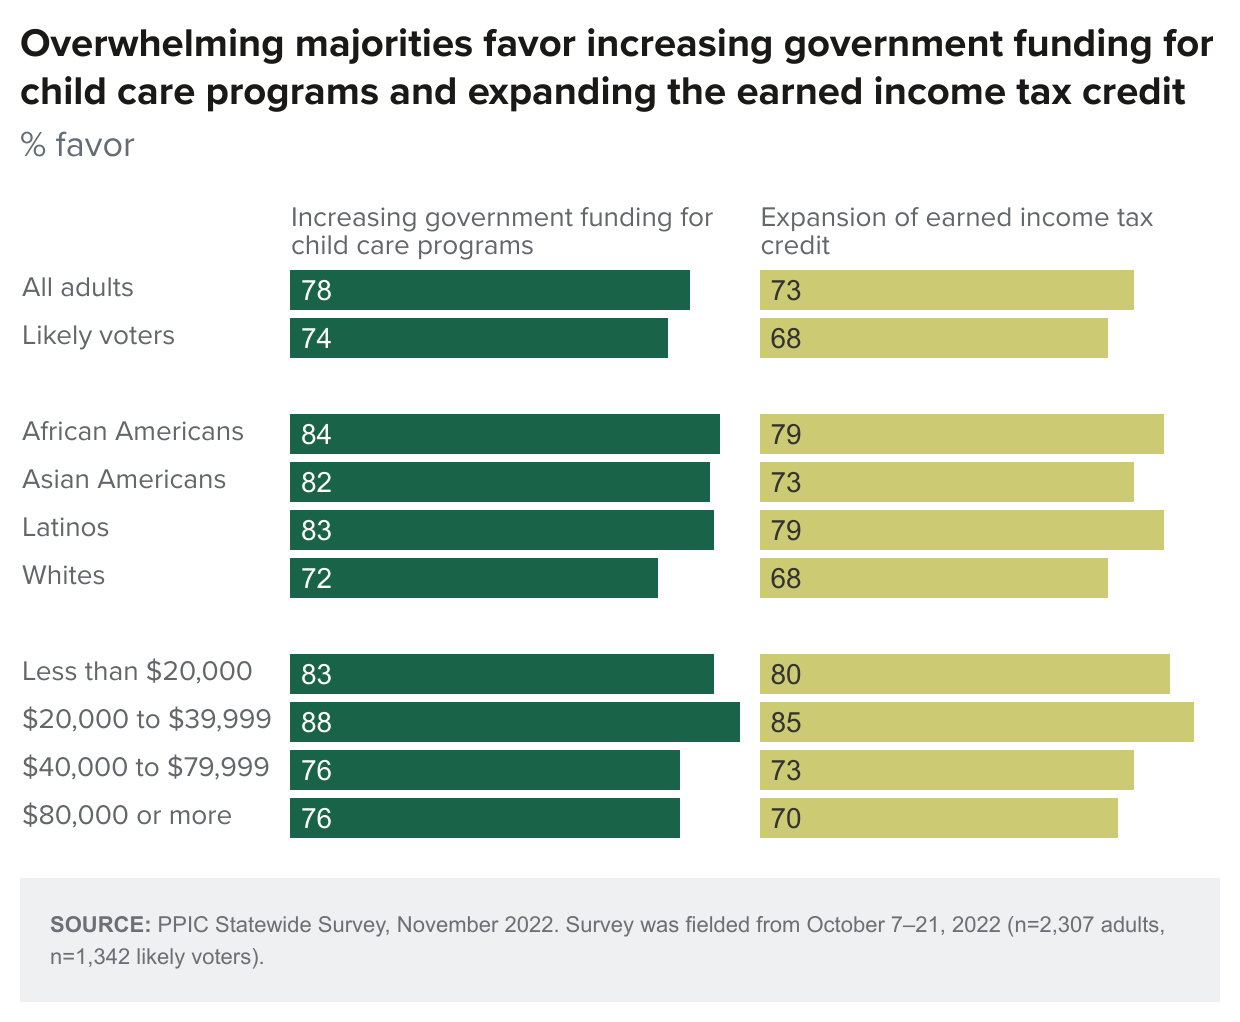 figure - Overwhelming majorities favor increasing government funding for child care programs and expanding the earned income tax credit